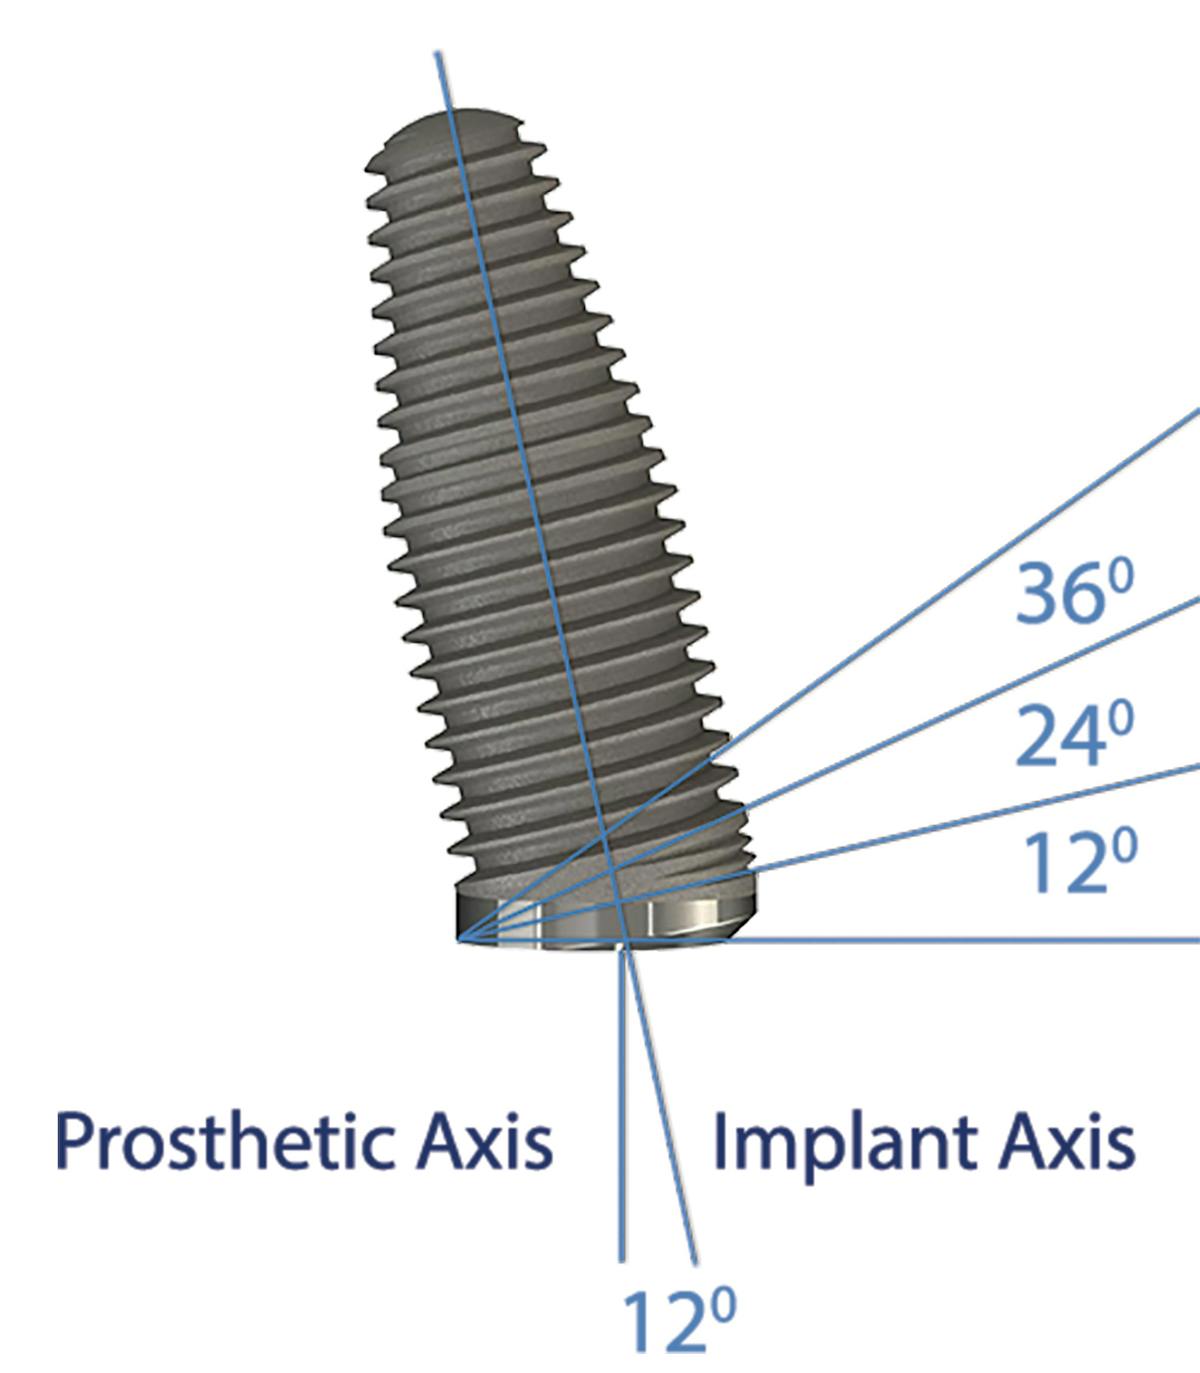 Figure 1: Diagram of implant angle corrections for Co-Axis Implants